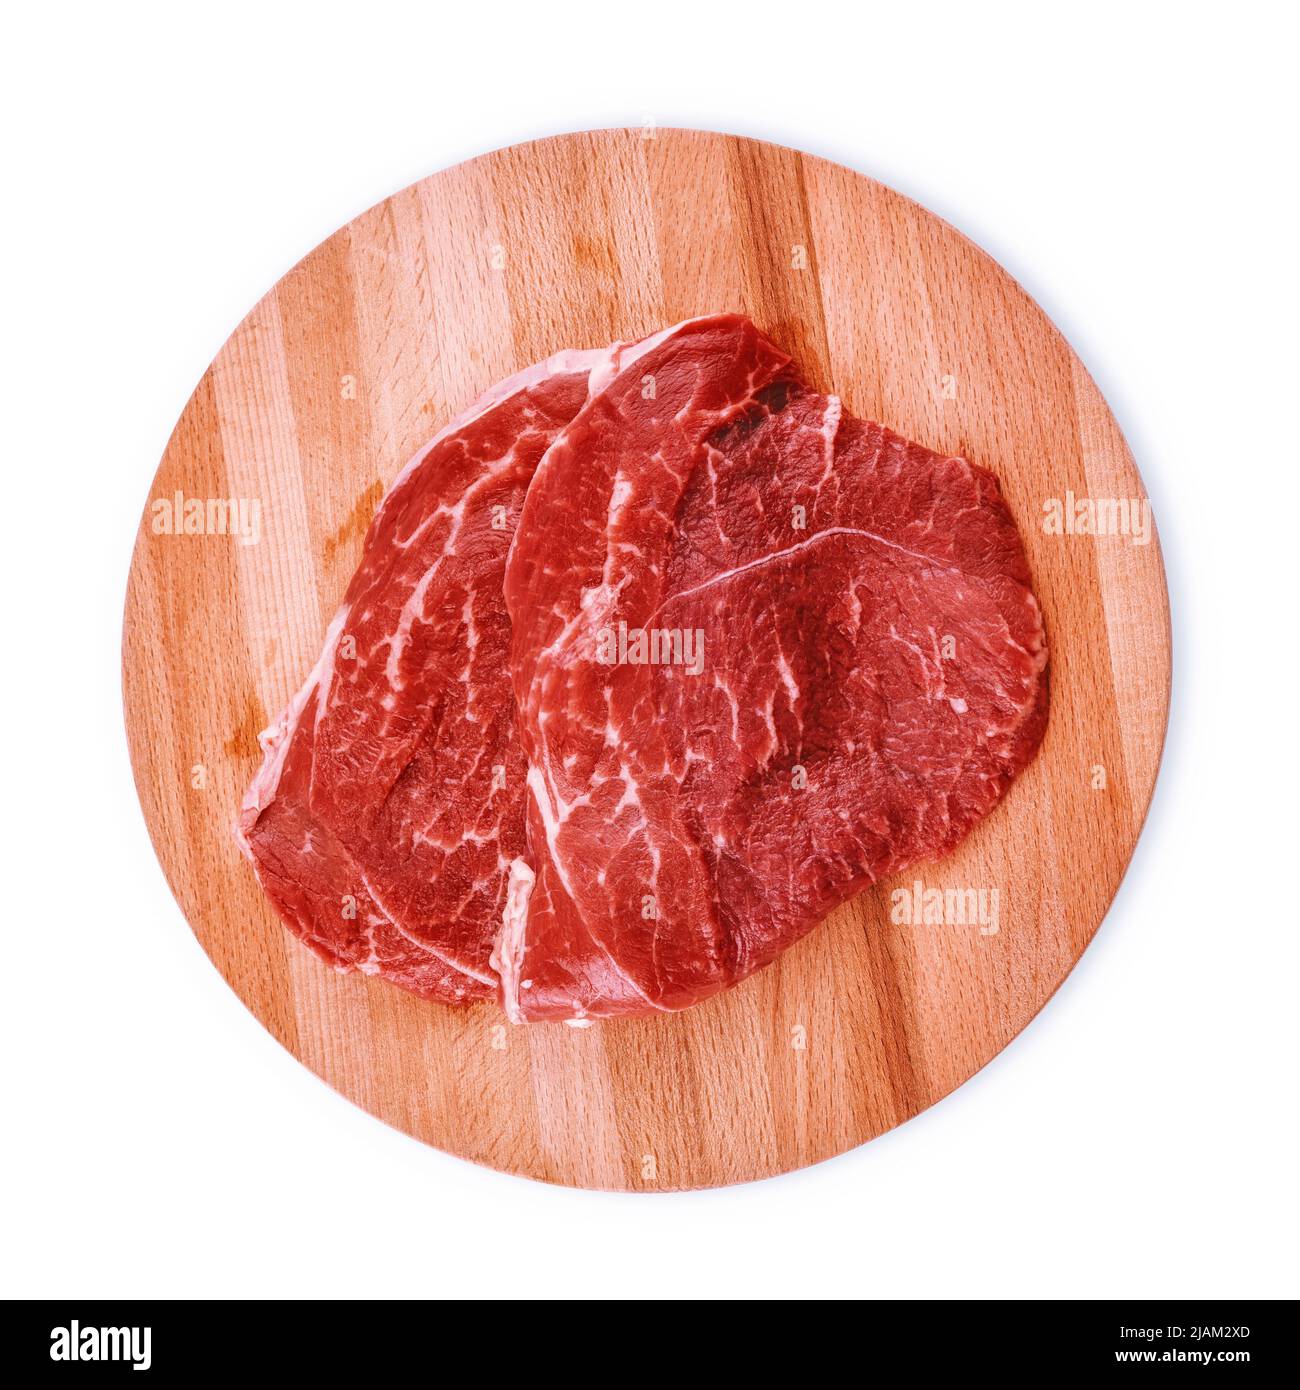 Raw meat for steak on round wooden cutting board. Top view isolated on white, clipping path included Stock Photo